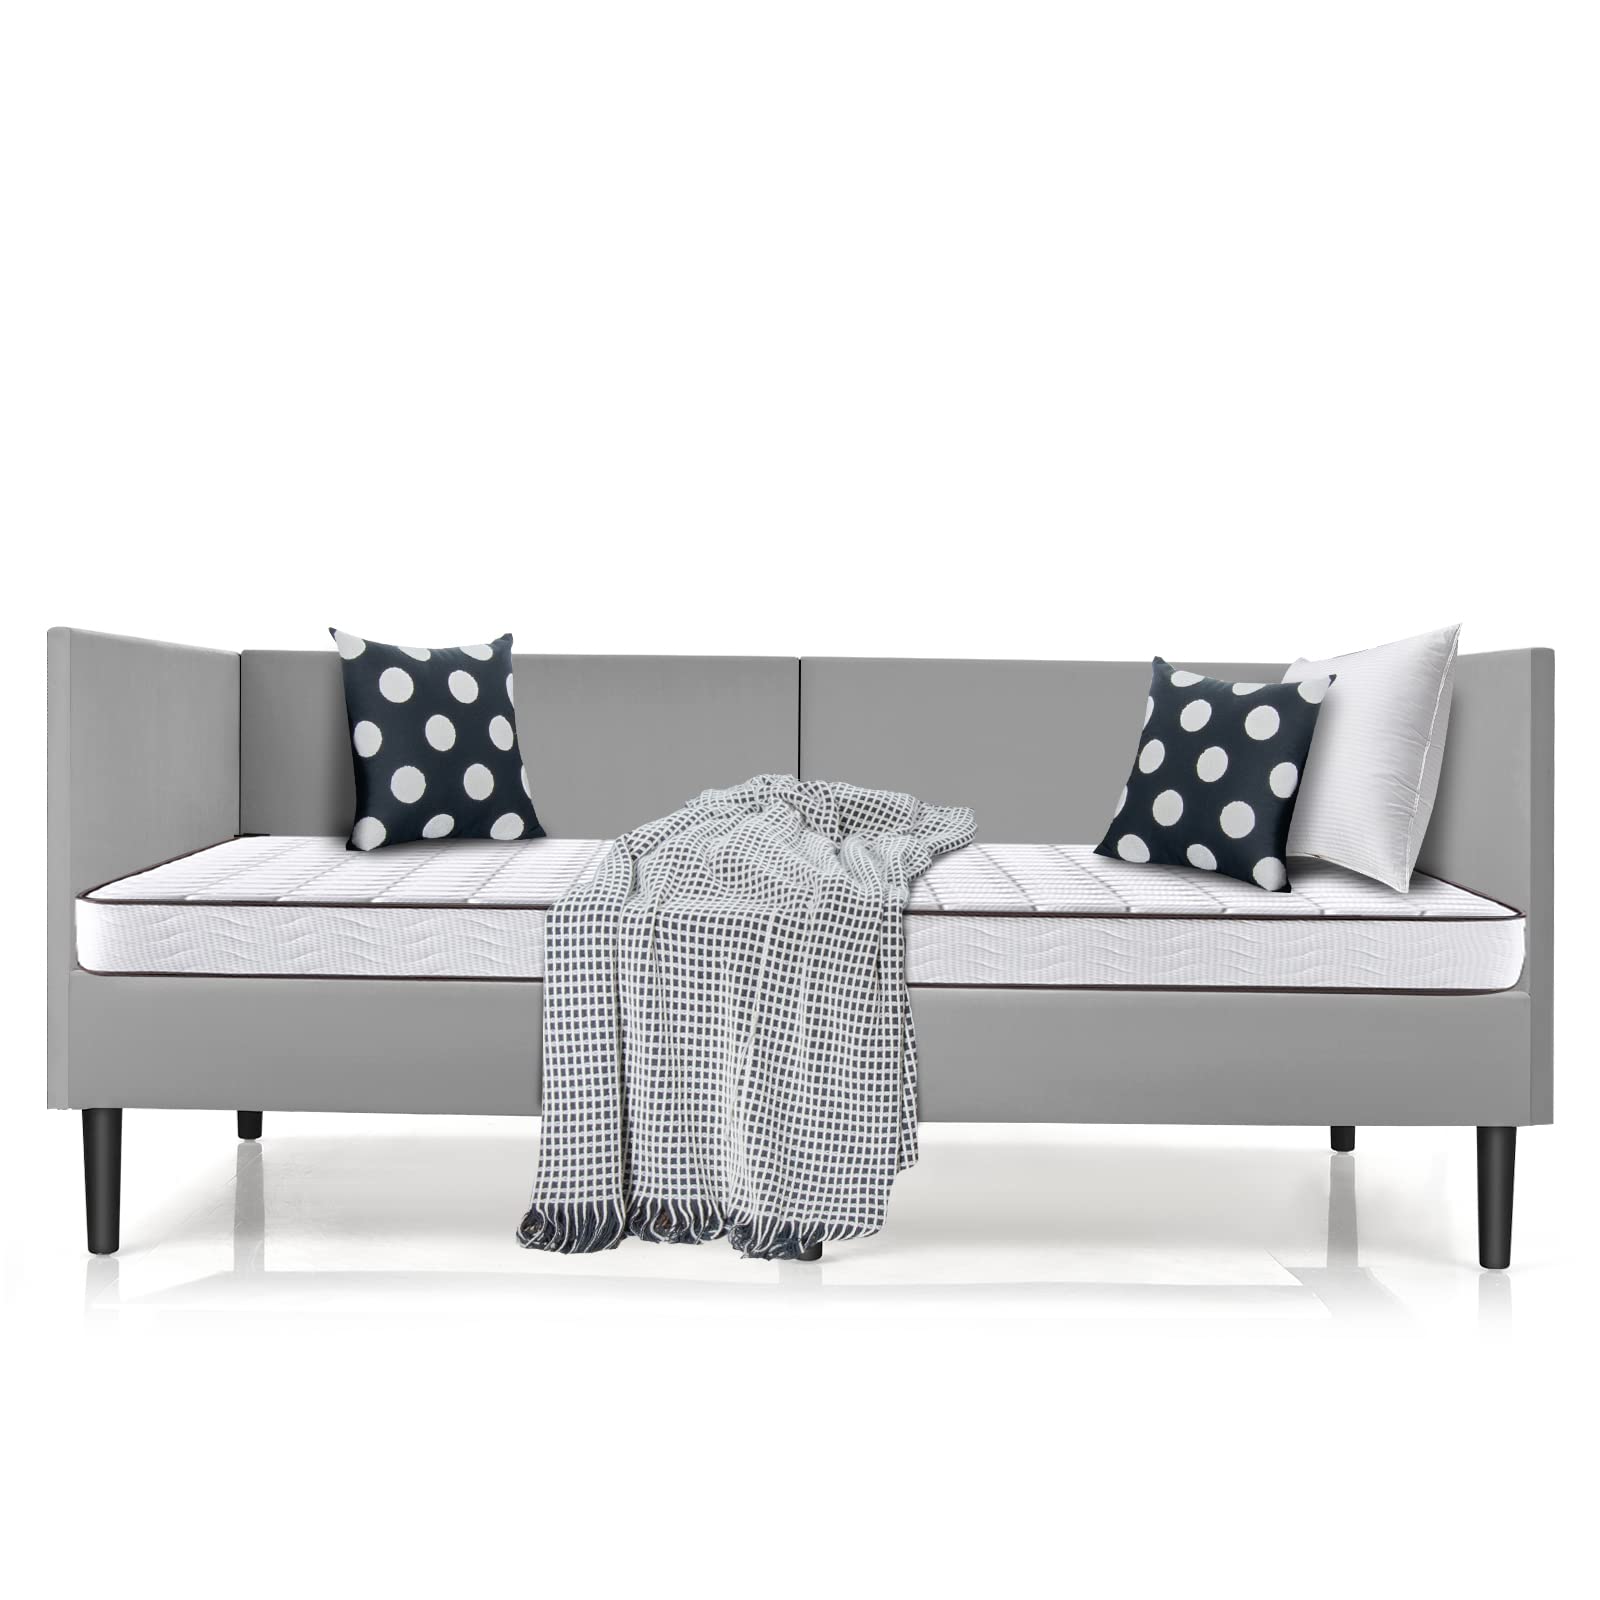 Giantex Upholstered Daybed, Twin Daybed